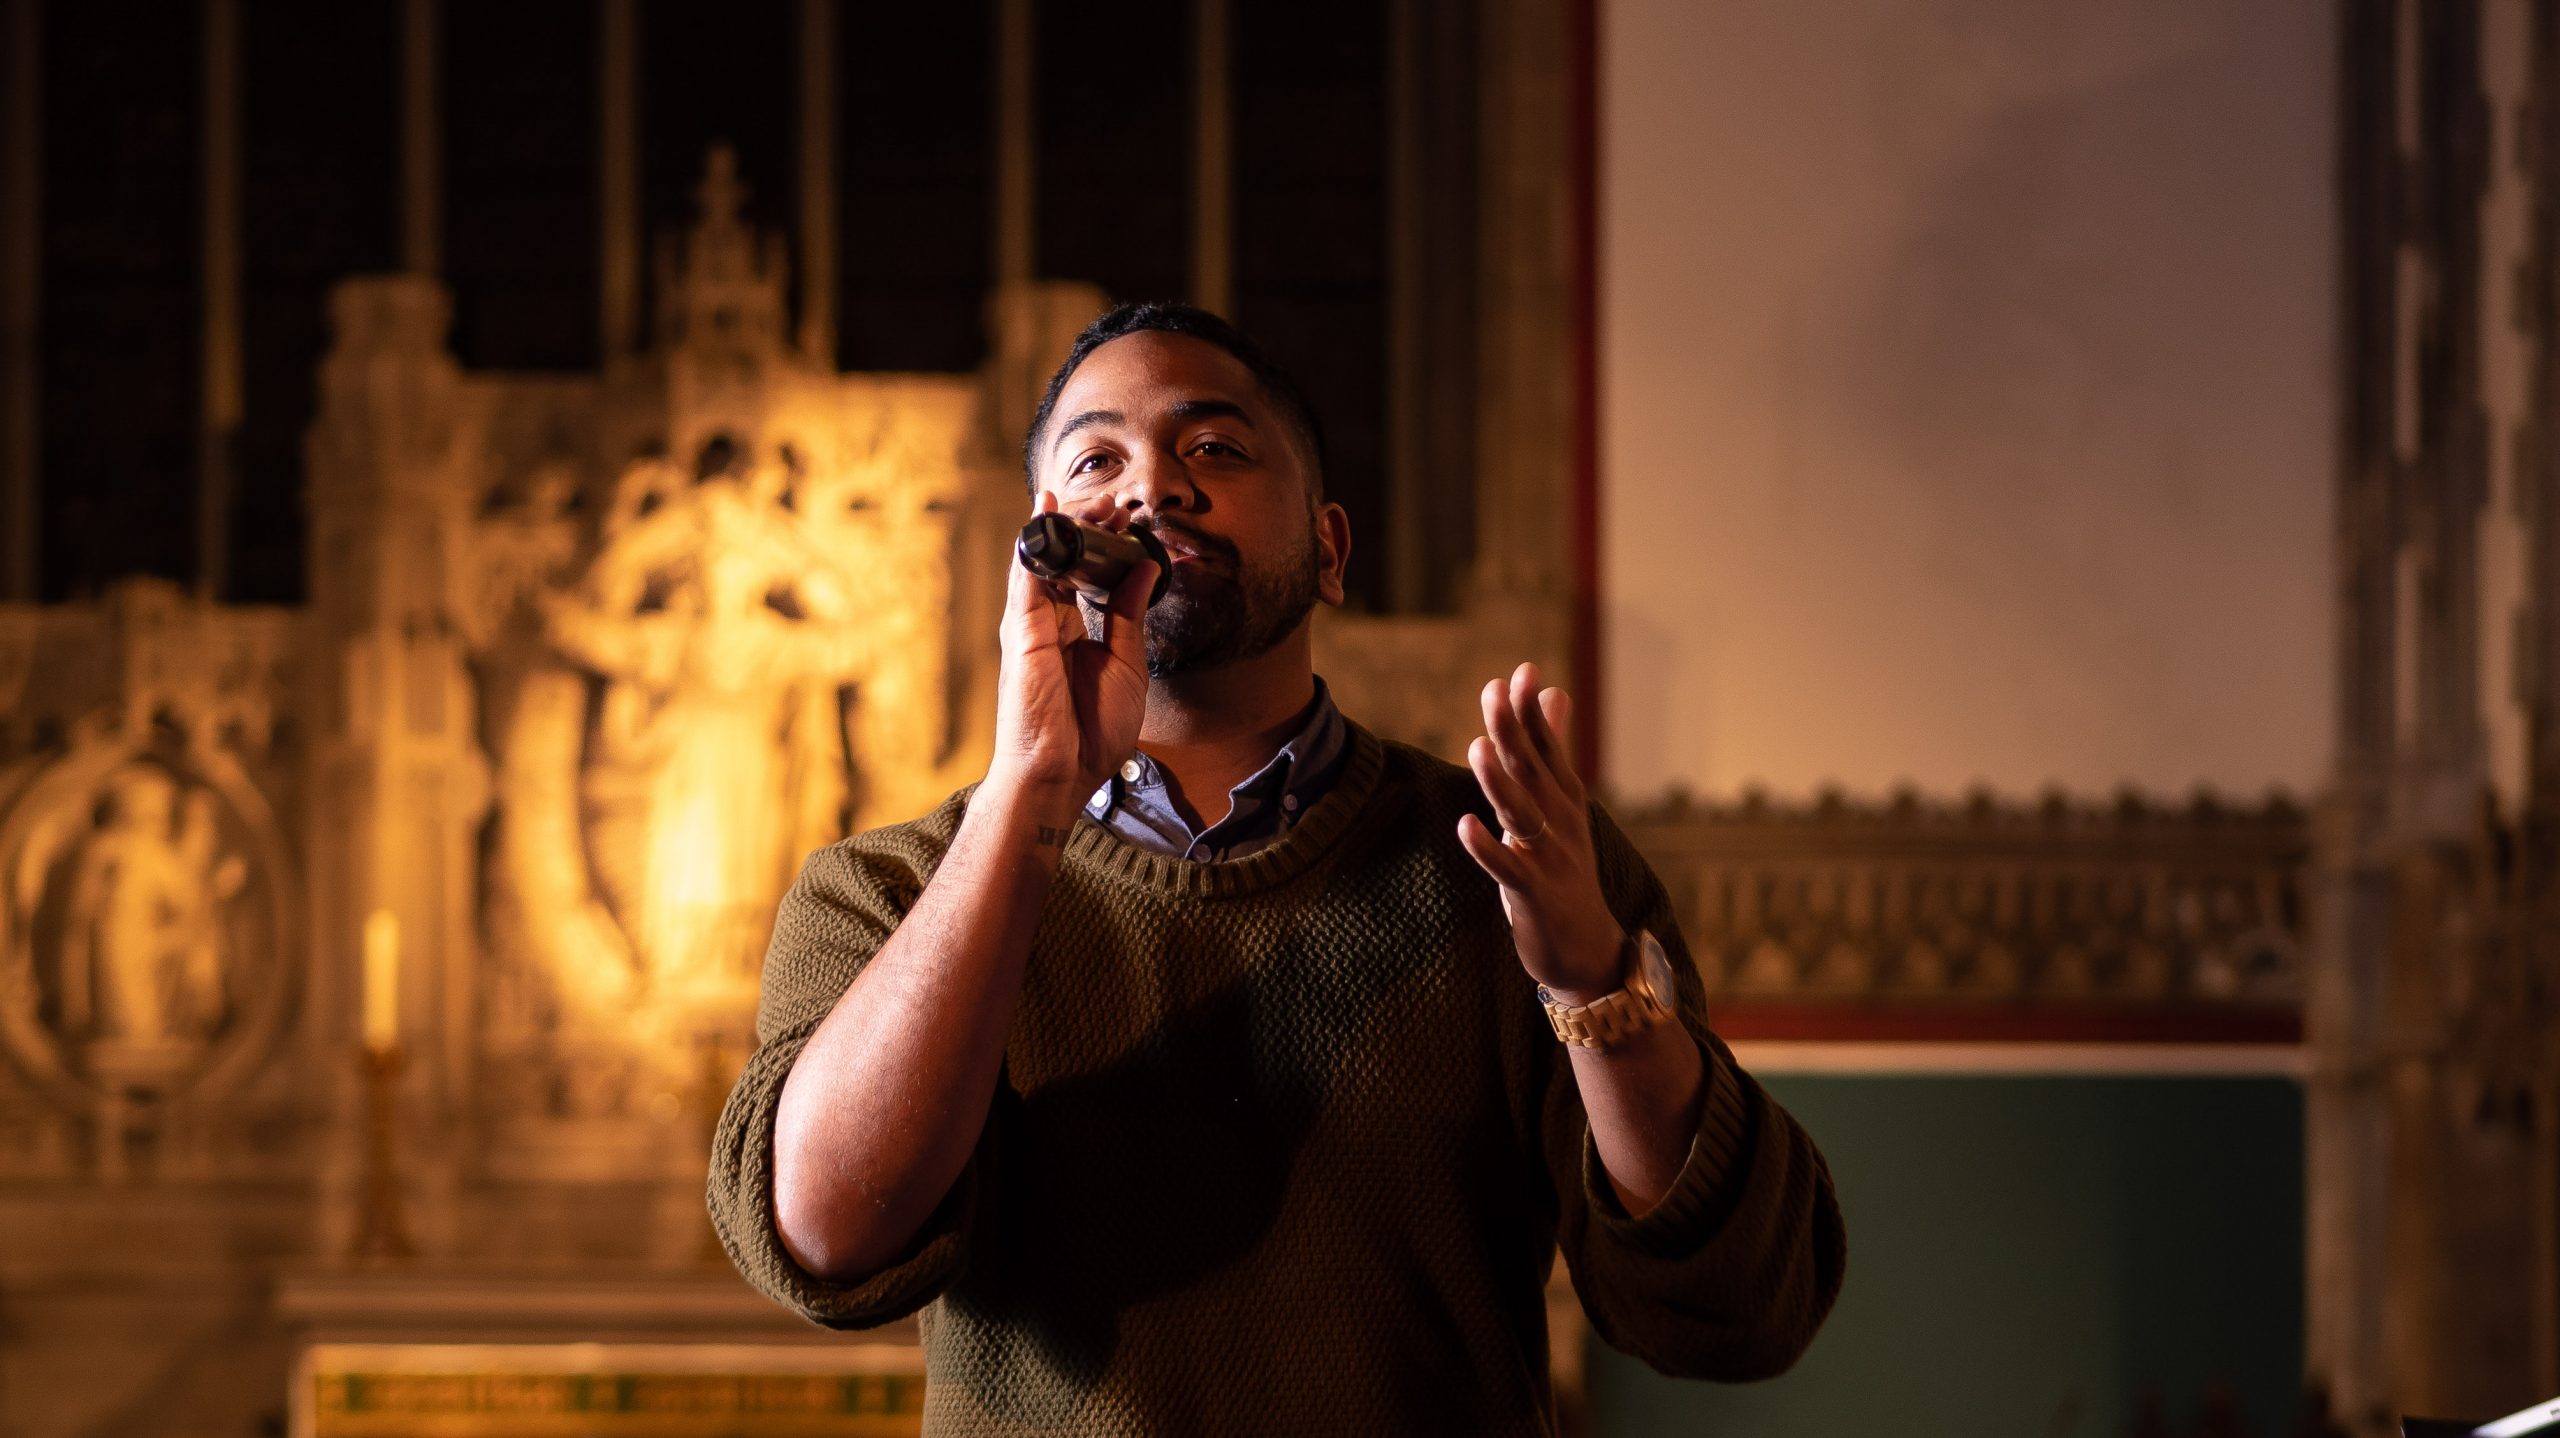 Visual aid: Male singer singing passionately in a church